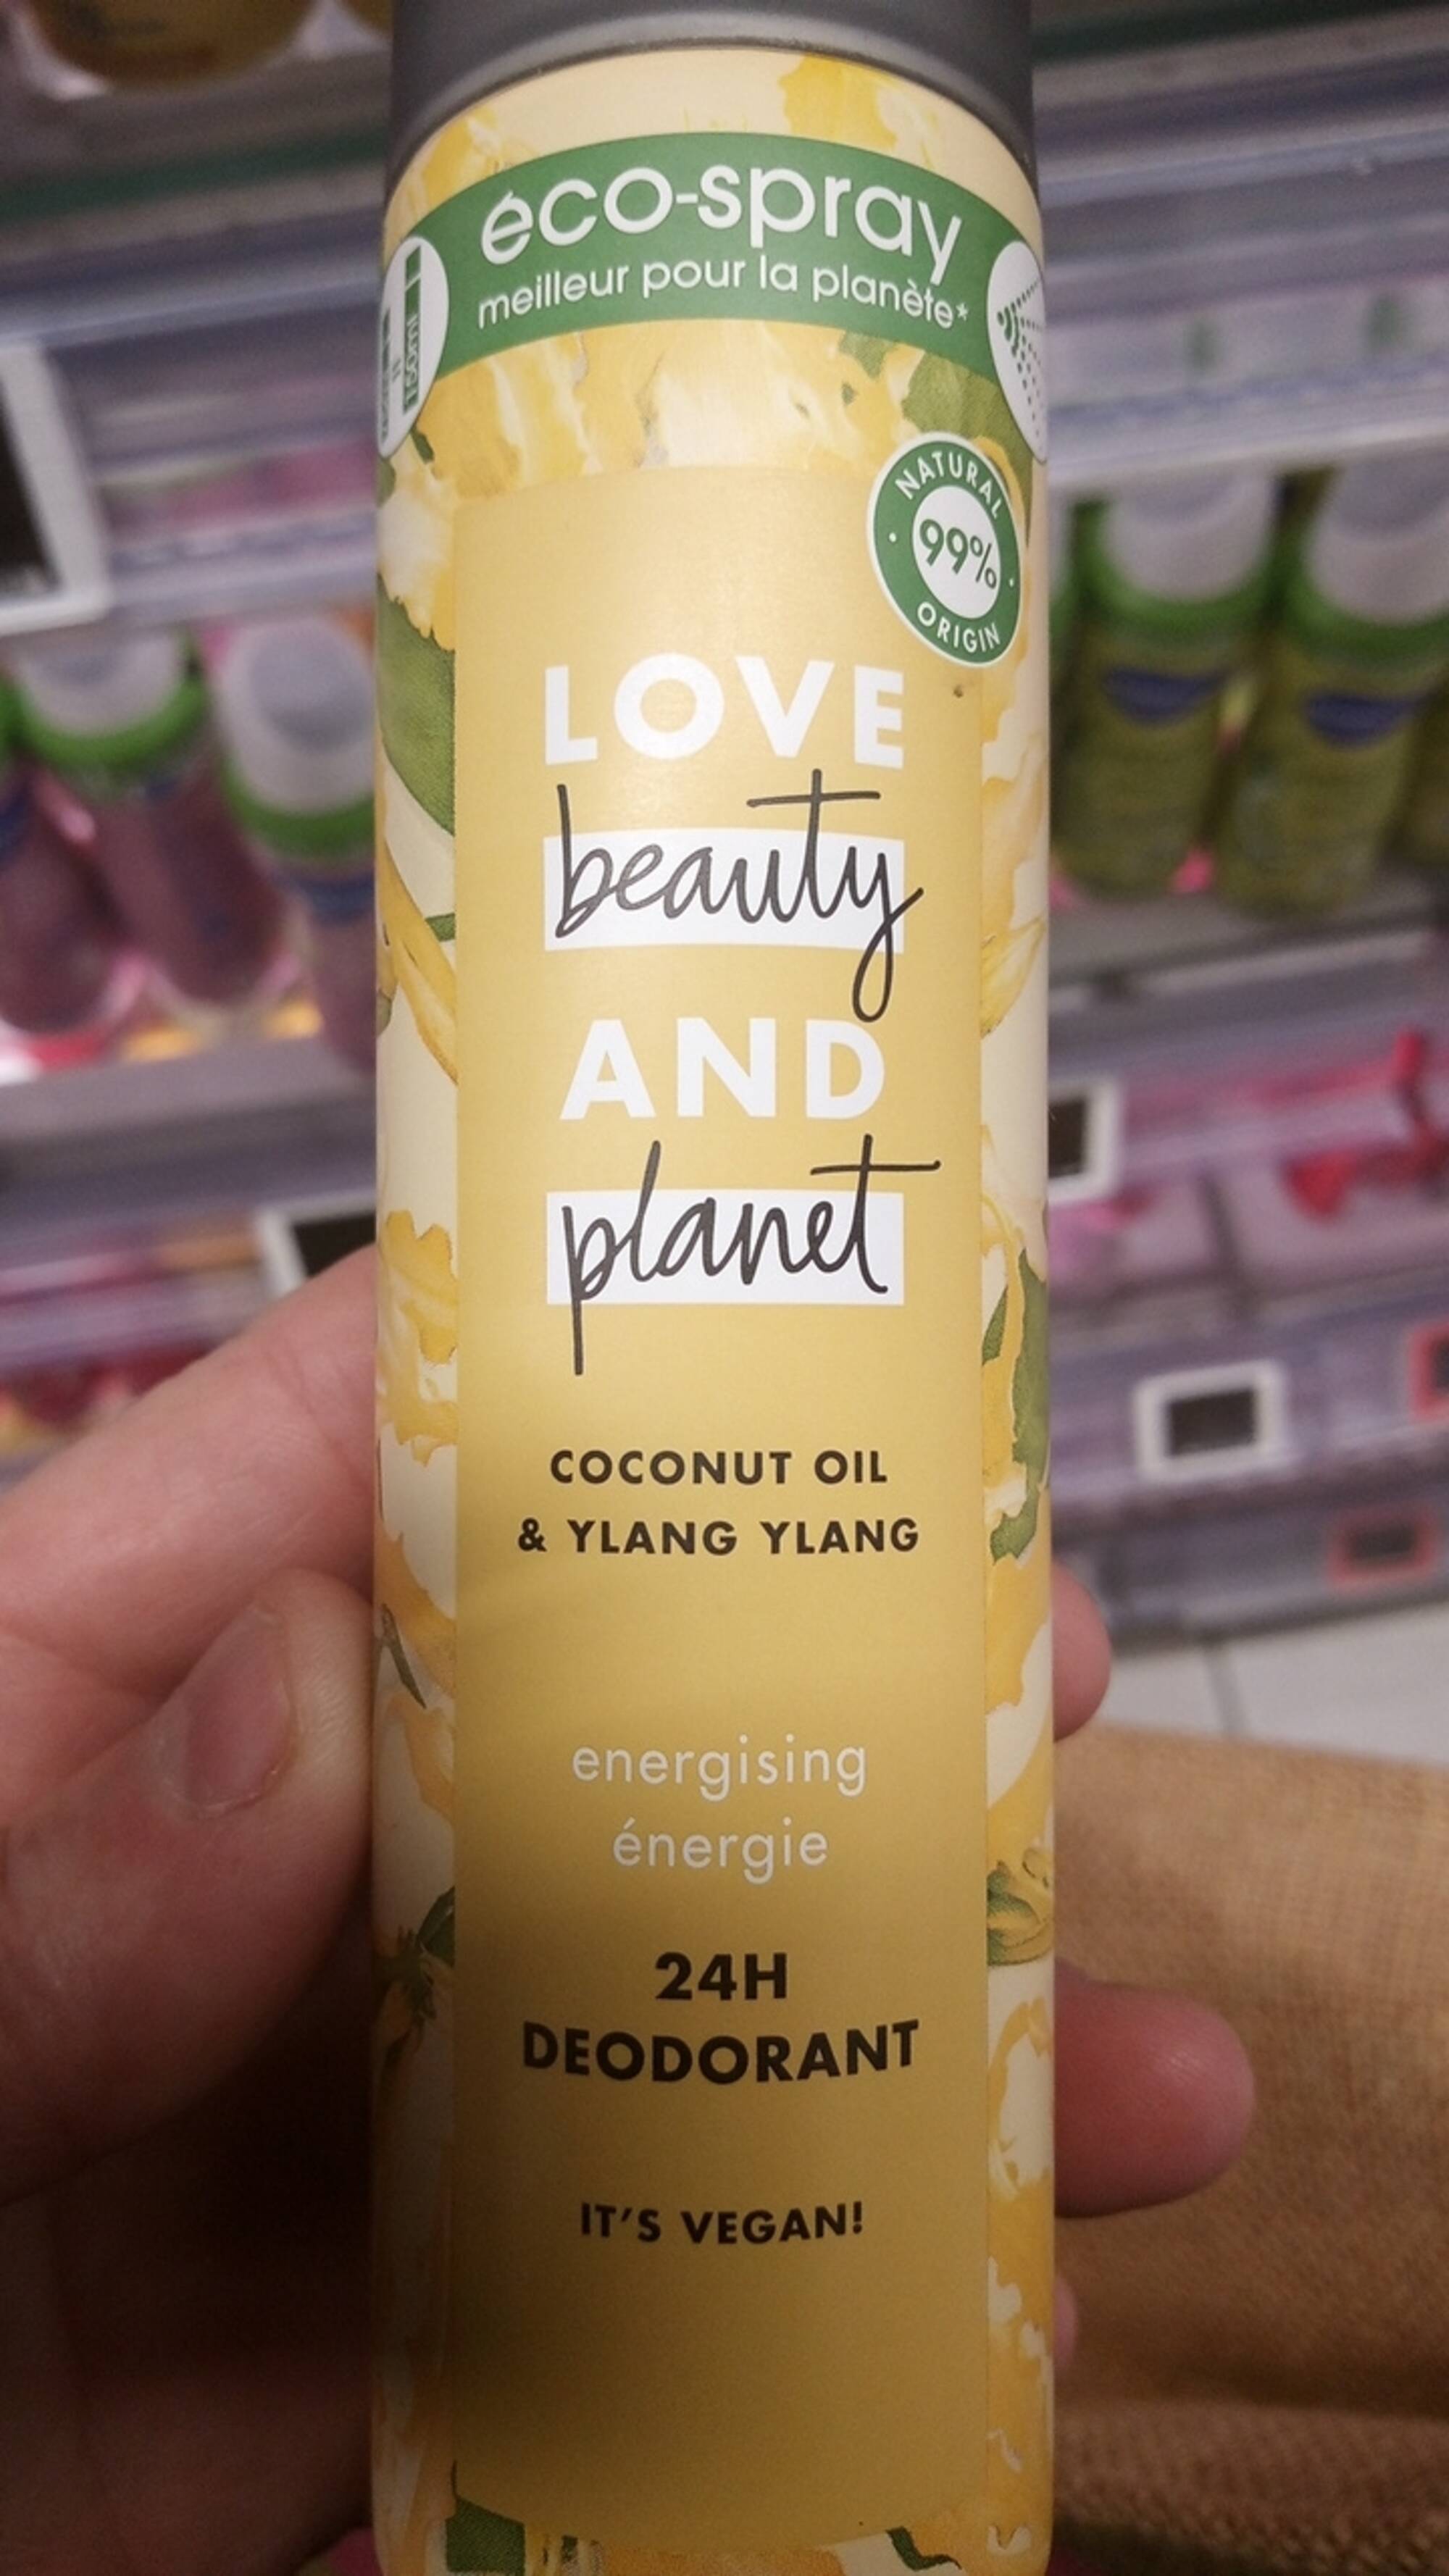 LOVE BEAUTY AND PLANET - Coconut oil & Ylang ylang - Déodorant 24h